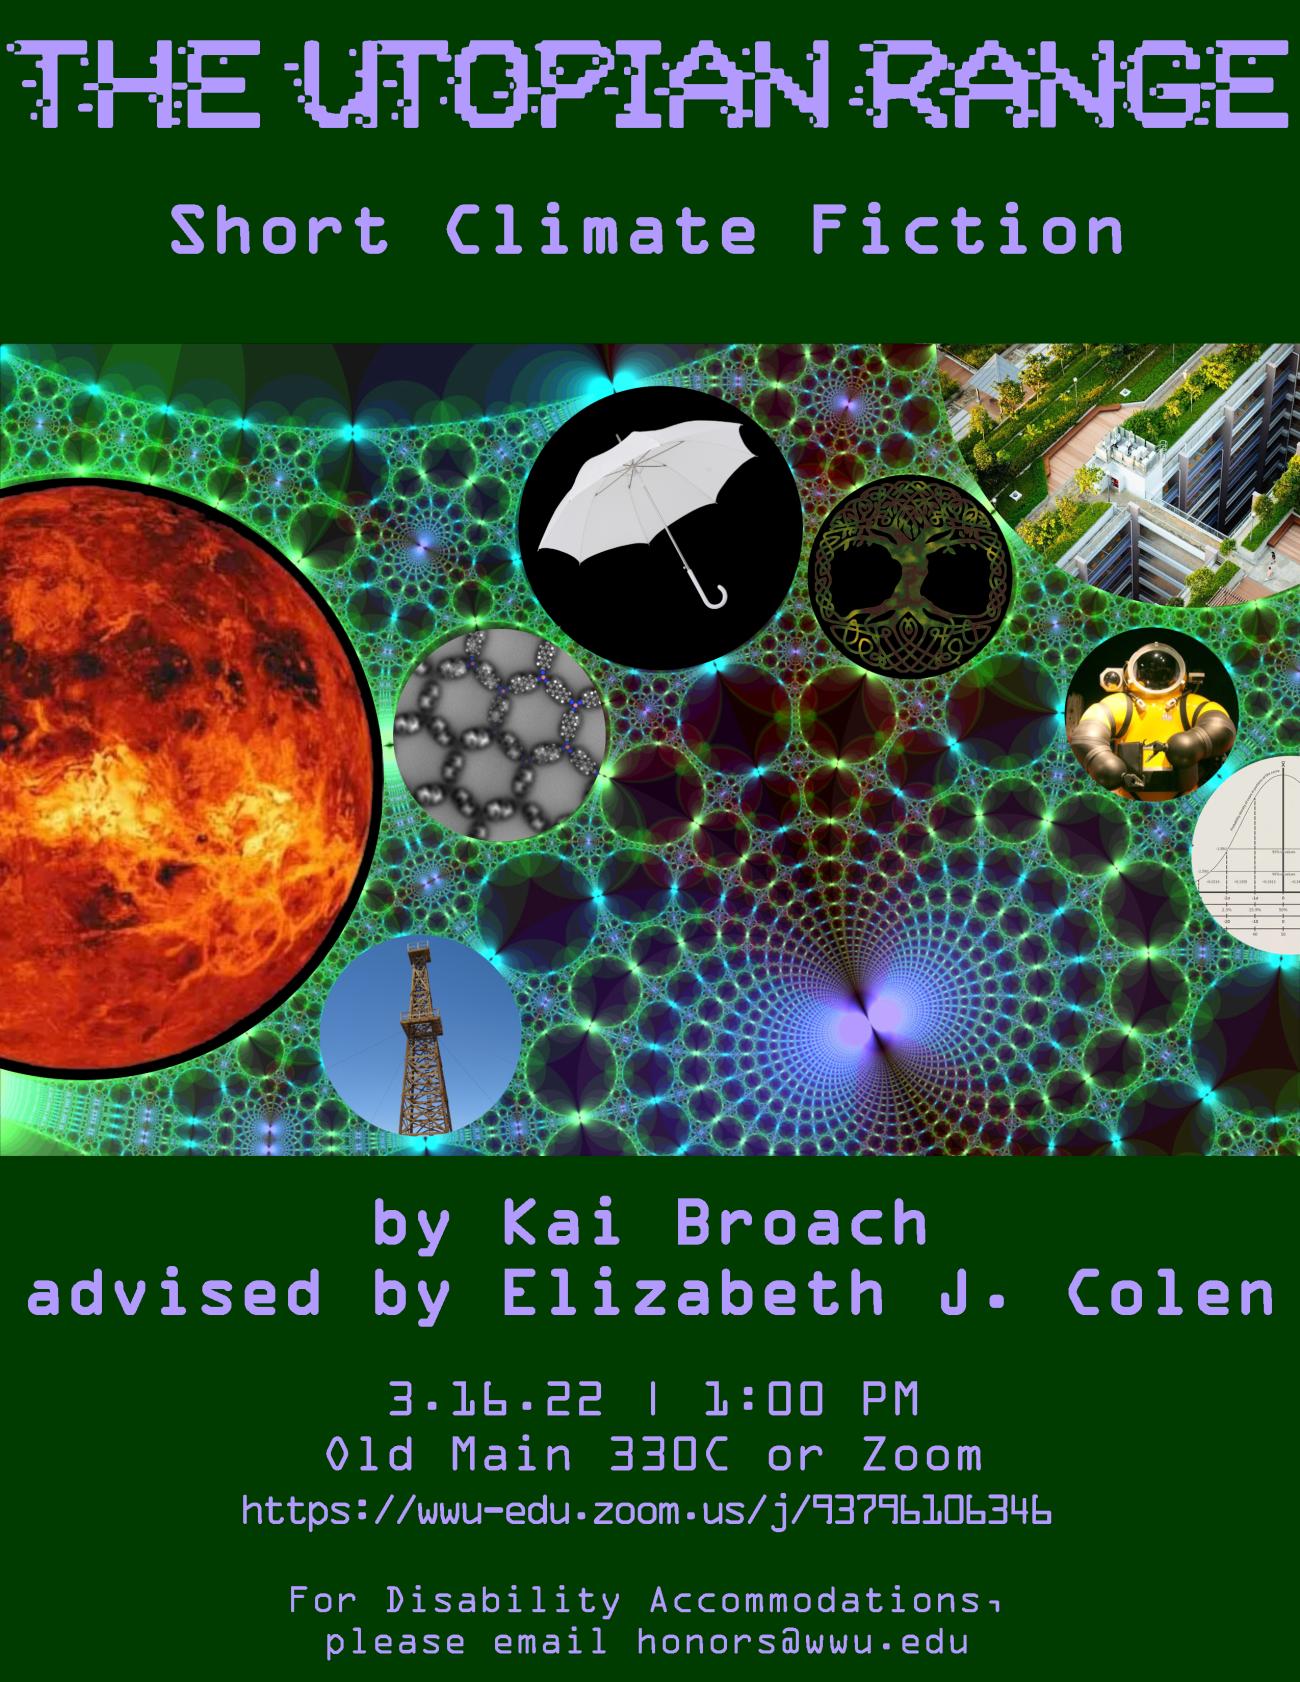 Green poster with a fractal design containing various images, including a green roof, a white umbrella, and the planet Venus. Text reads: "The Utopian Range: Short Climate Fiction by Kai Broach, advised by Elizabeth J. Colen. 3/16/22 at 1:00PM. Old Main 330C or Zoom. For Disability Accommodations, Please Email honors@wwu.edu"